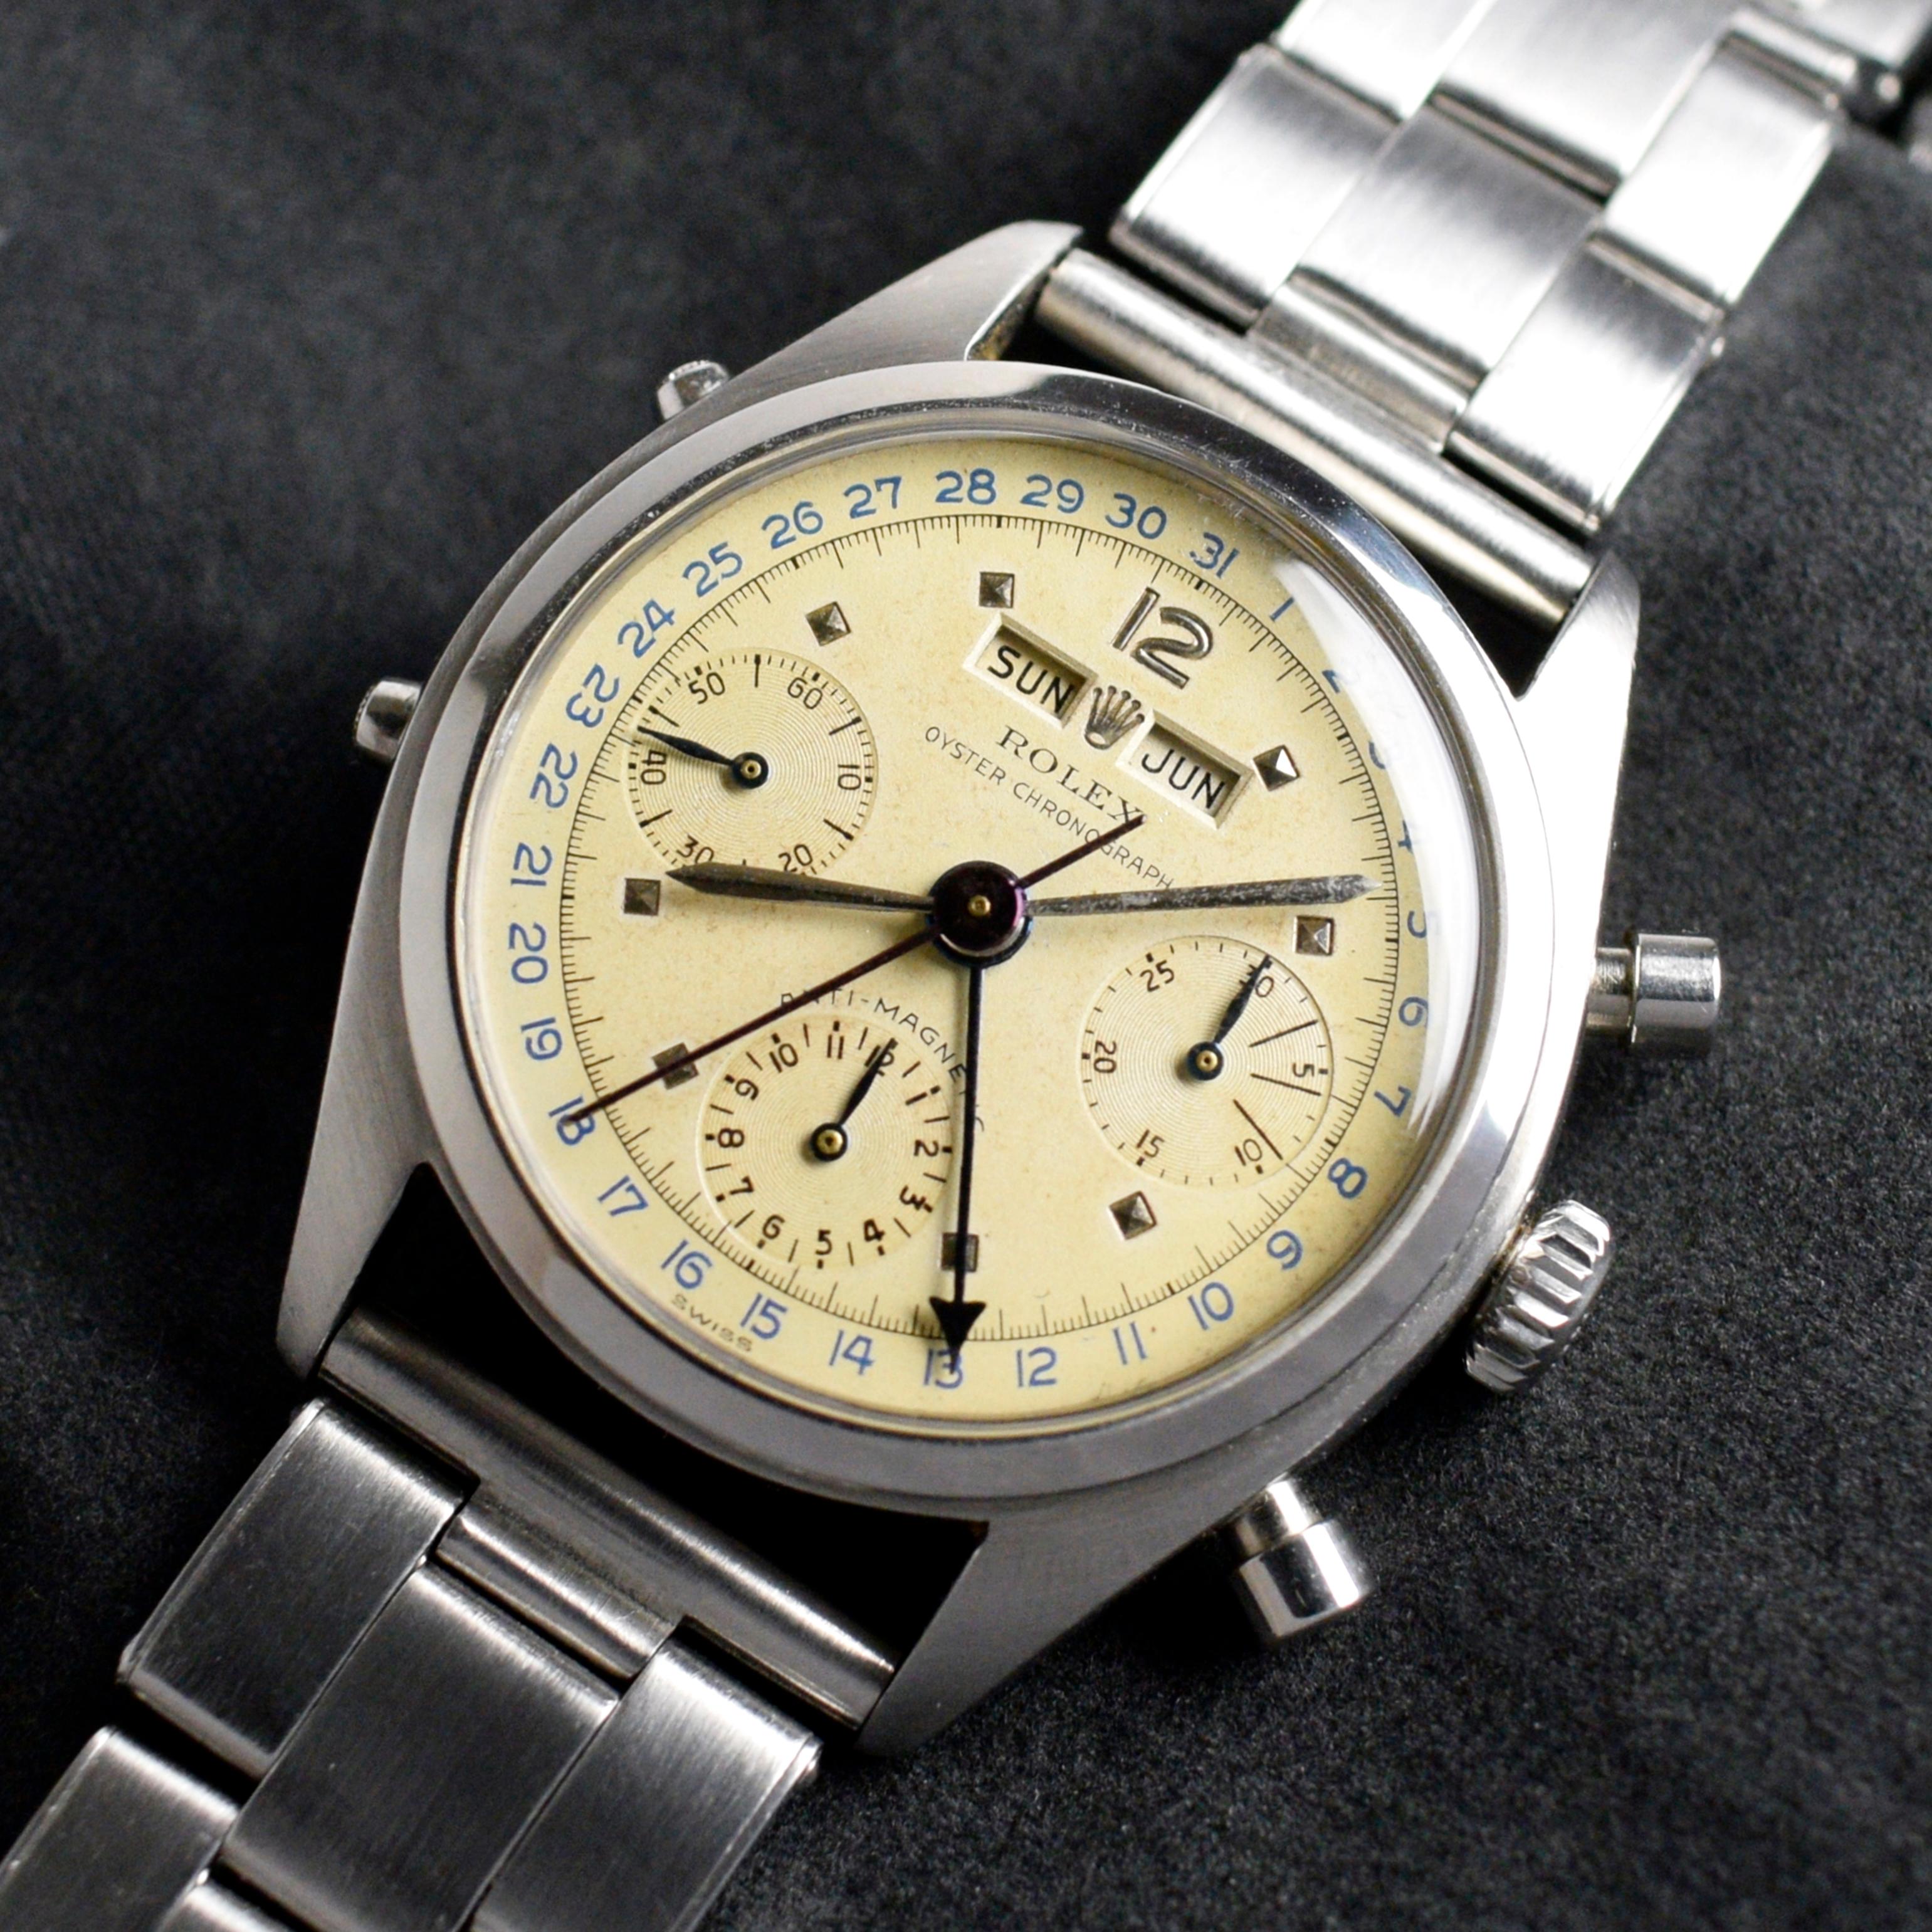 Brand: Vintage Rolex
Model: 6036
Year: 1954
Serial number: 94xxxx
Reference: C03647; C03786

Jean Claude Killy is one of the legendary Olympic Ski champions who has one of the longest member of Rolex Board of Directors for over 40 years. He has been